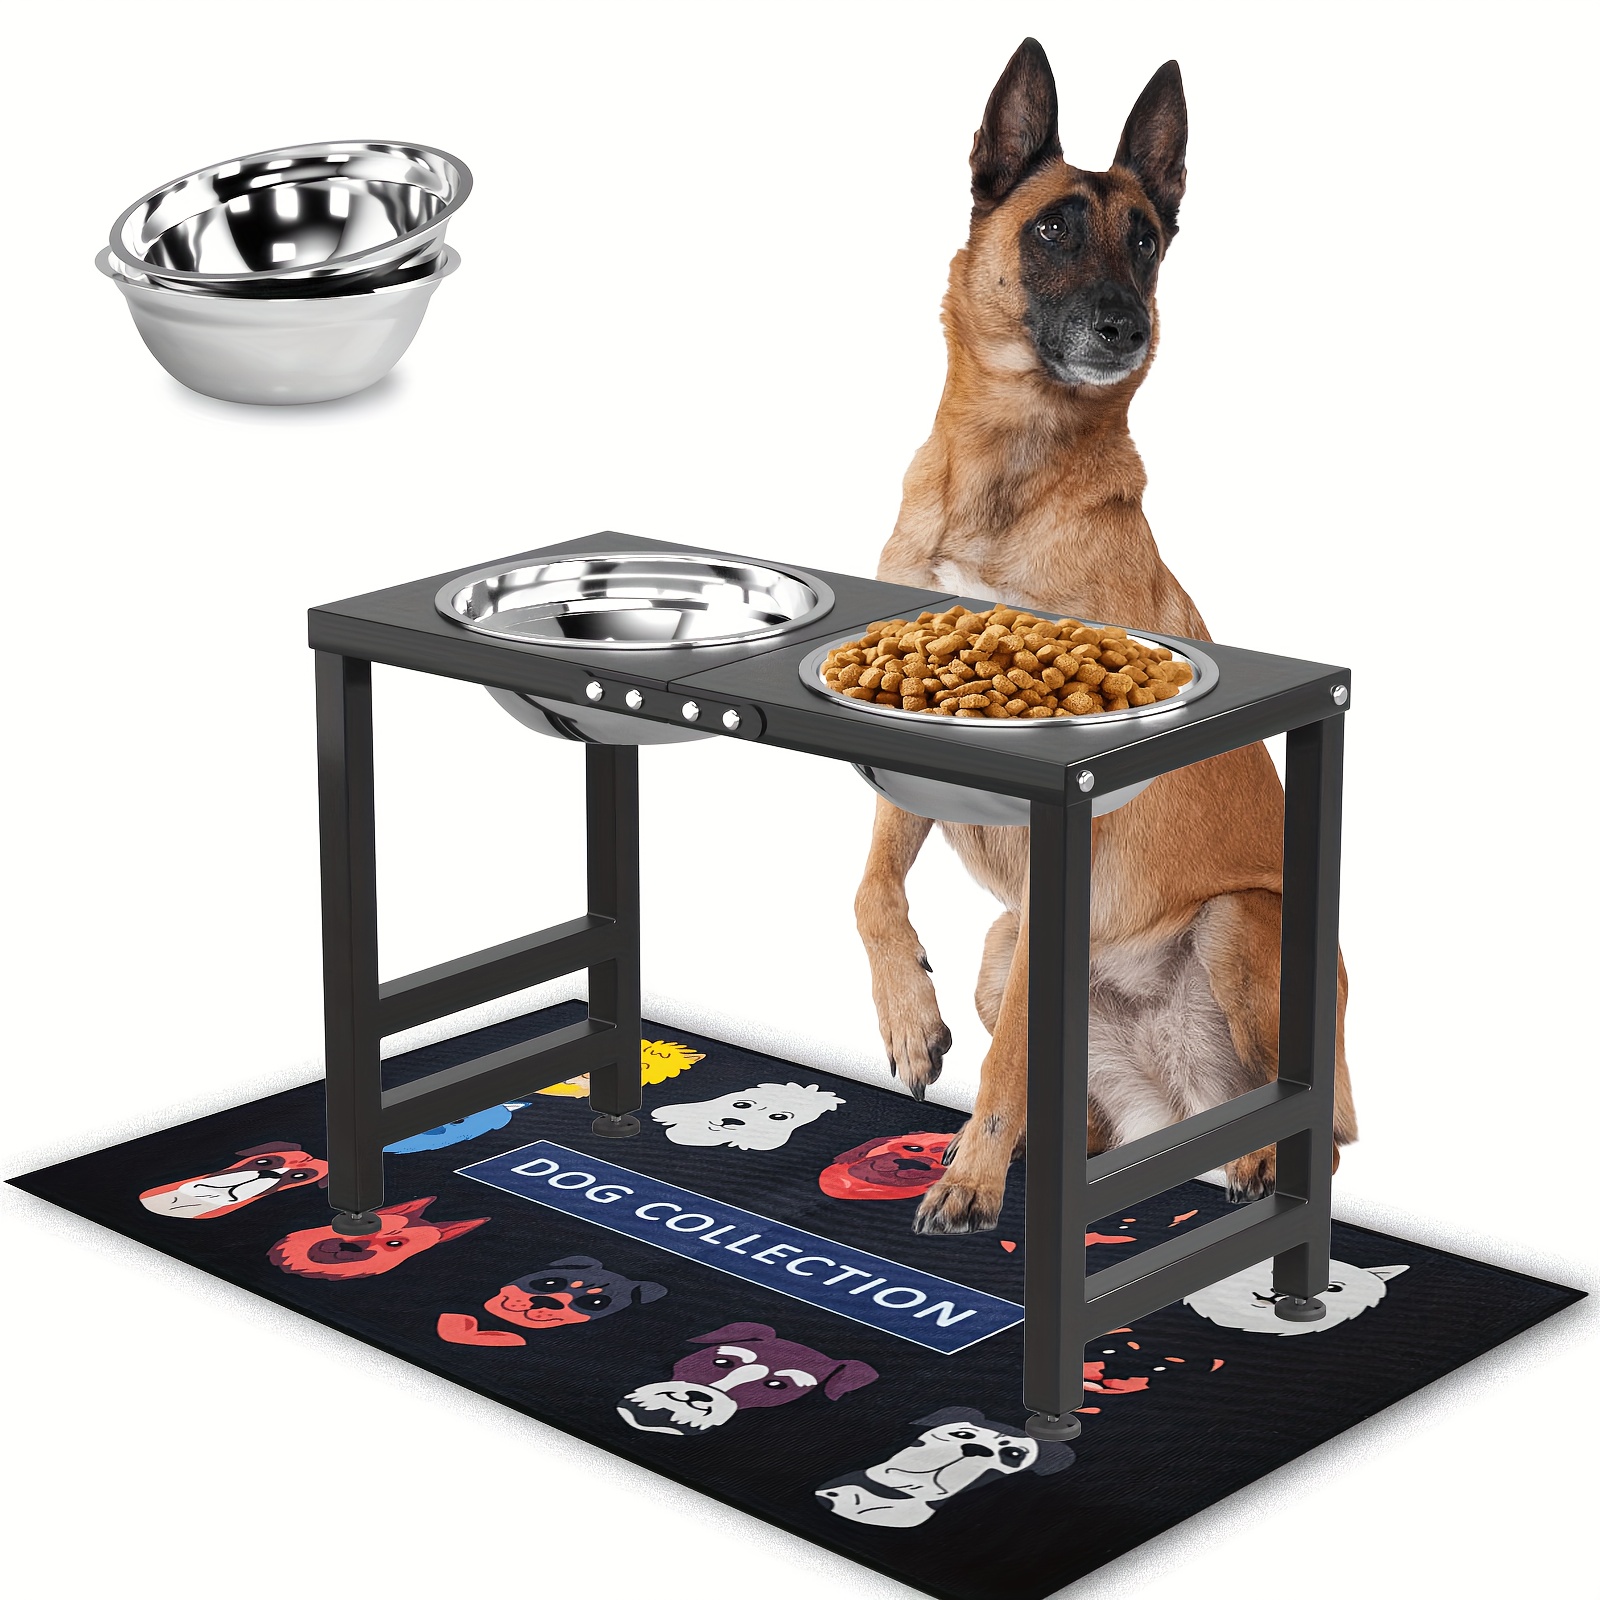 

Metal Elevated Dog Bowl Stand For Extra Large Dogs, Raised Dog Bowl Stand With Waterproof Mat And 2 Stainless Steel Dog Bowls, Dog Food & Water Bowls, Dog Feeder For Extra Large Breed